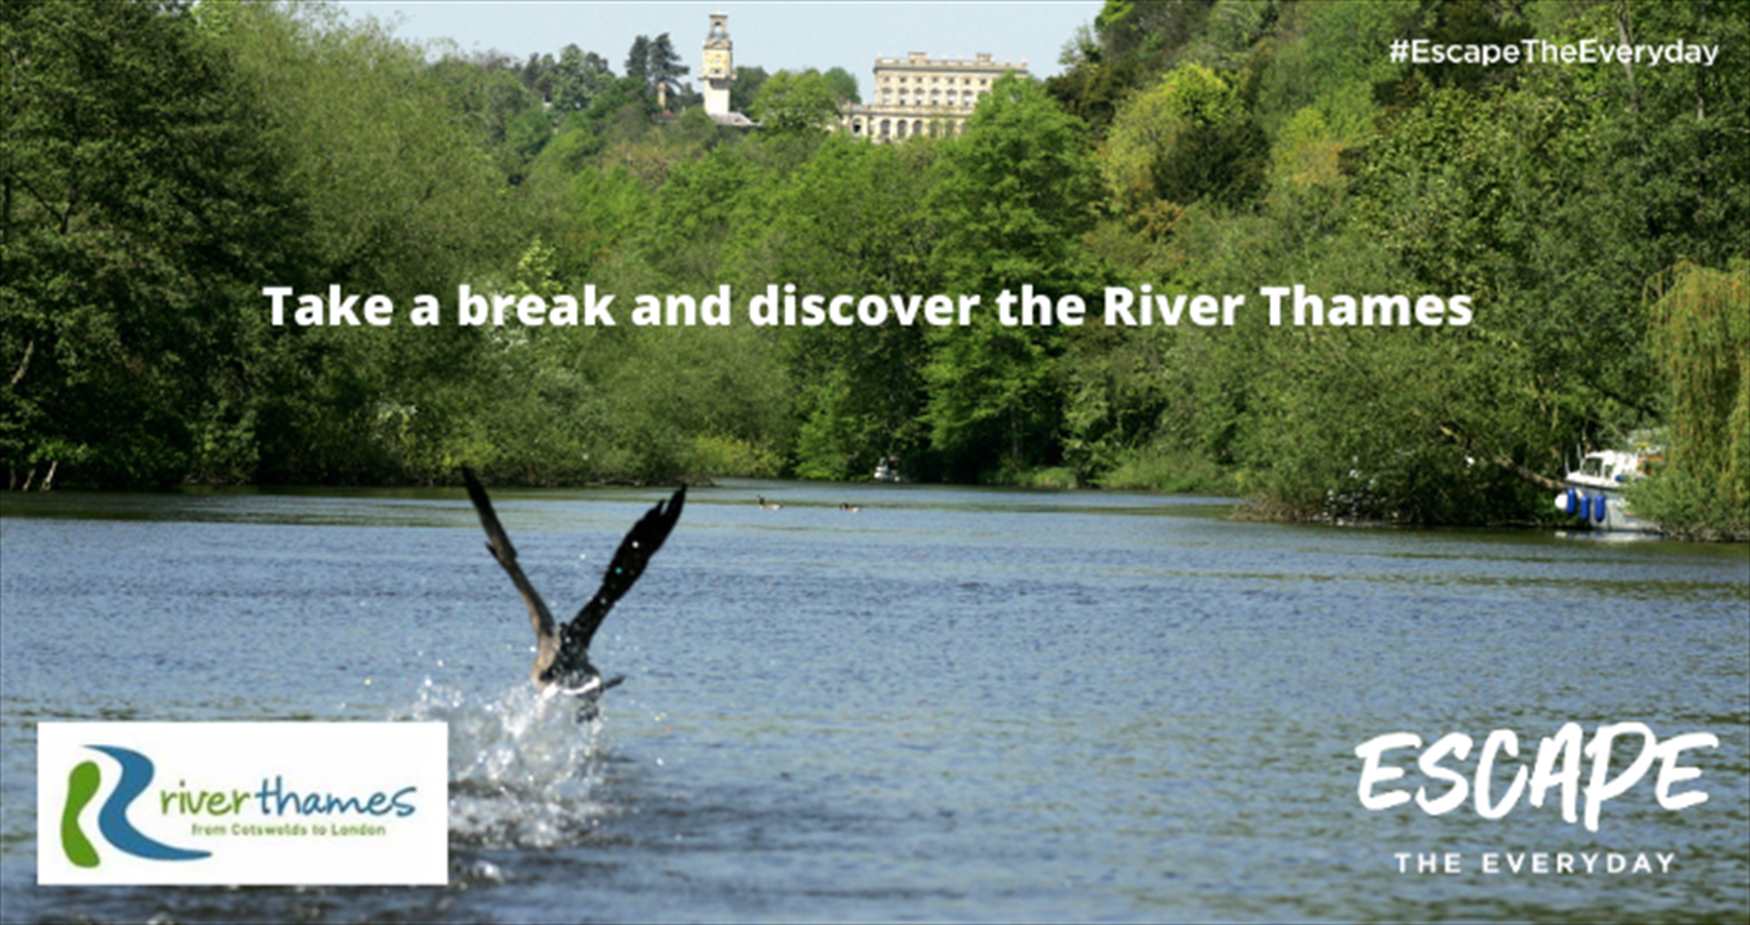 Escape the Everyday and take a break along the River Thames this Spring/Summer